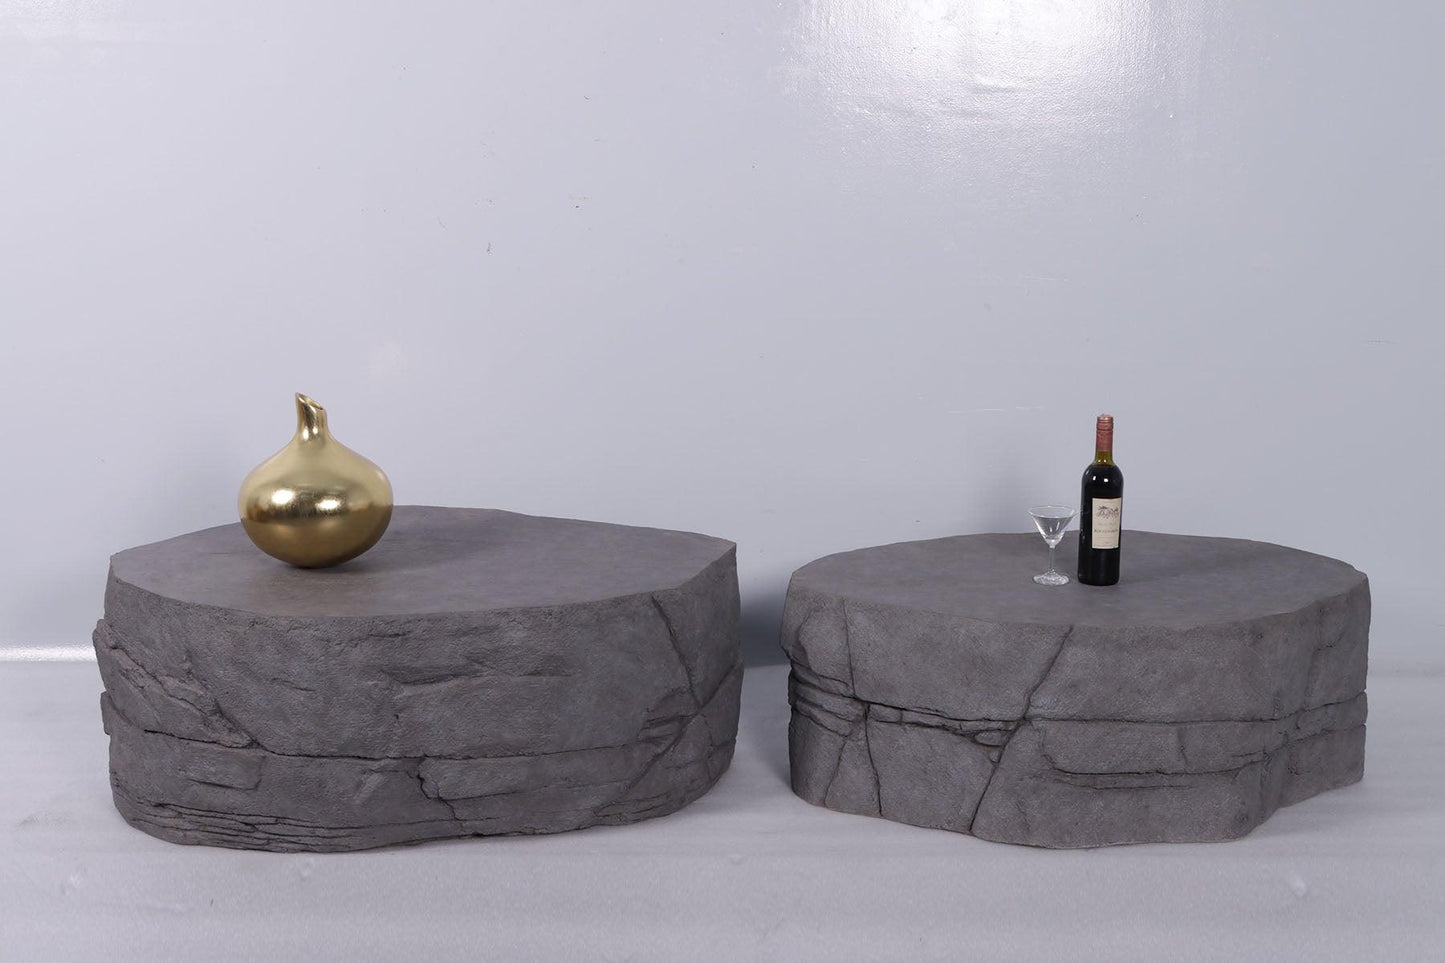 Large Rock Table Life Size Statue